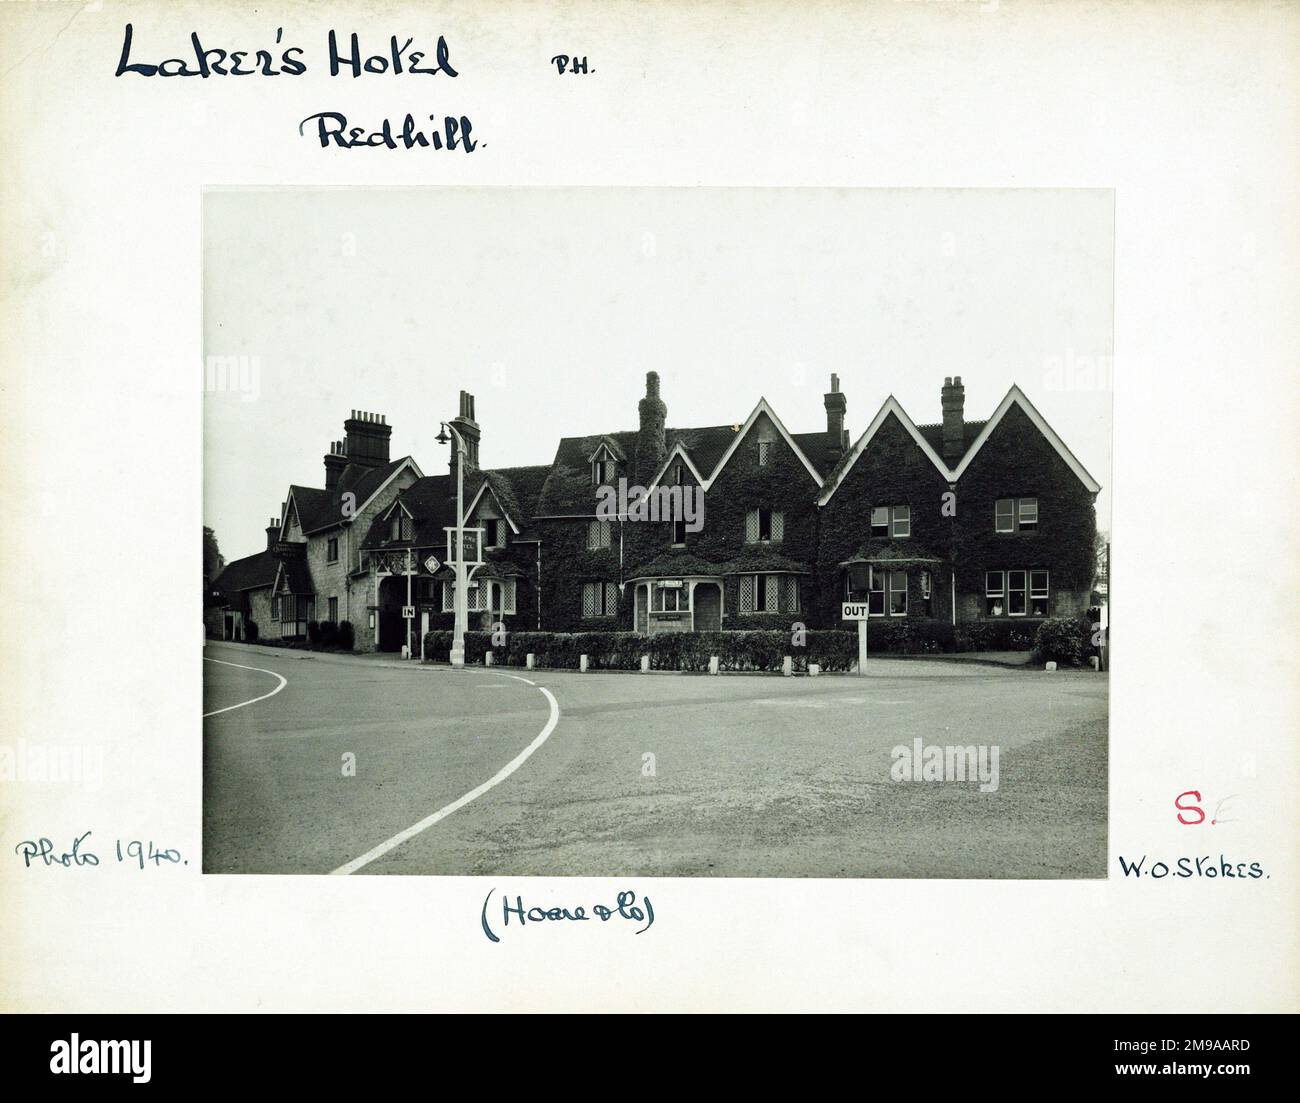 Photograph of Lakers Hotel, Redhill, Surrey. The main side of the print (shown here) depicts: Face on view of the pub.  The back of the print (available on request) details: Trading Record 1934 . 1946 for the Lakers Hotel, Redhill, Surrey RH1 4BL. As of July 2018 . Toby Carvery (Mitchells & Butlers) Stock Photo